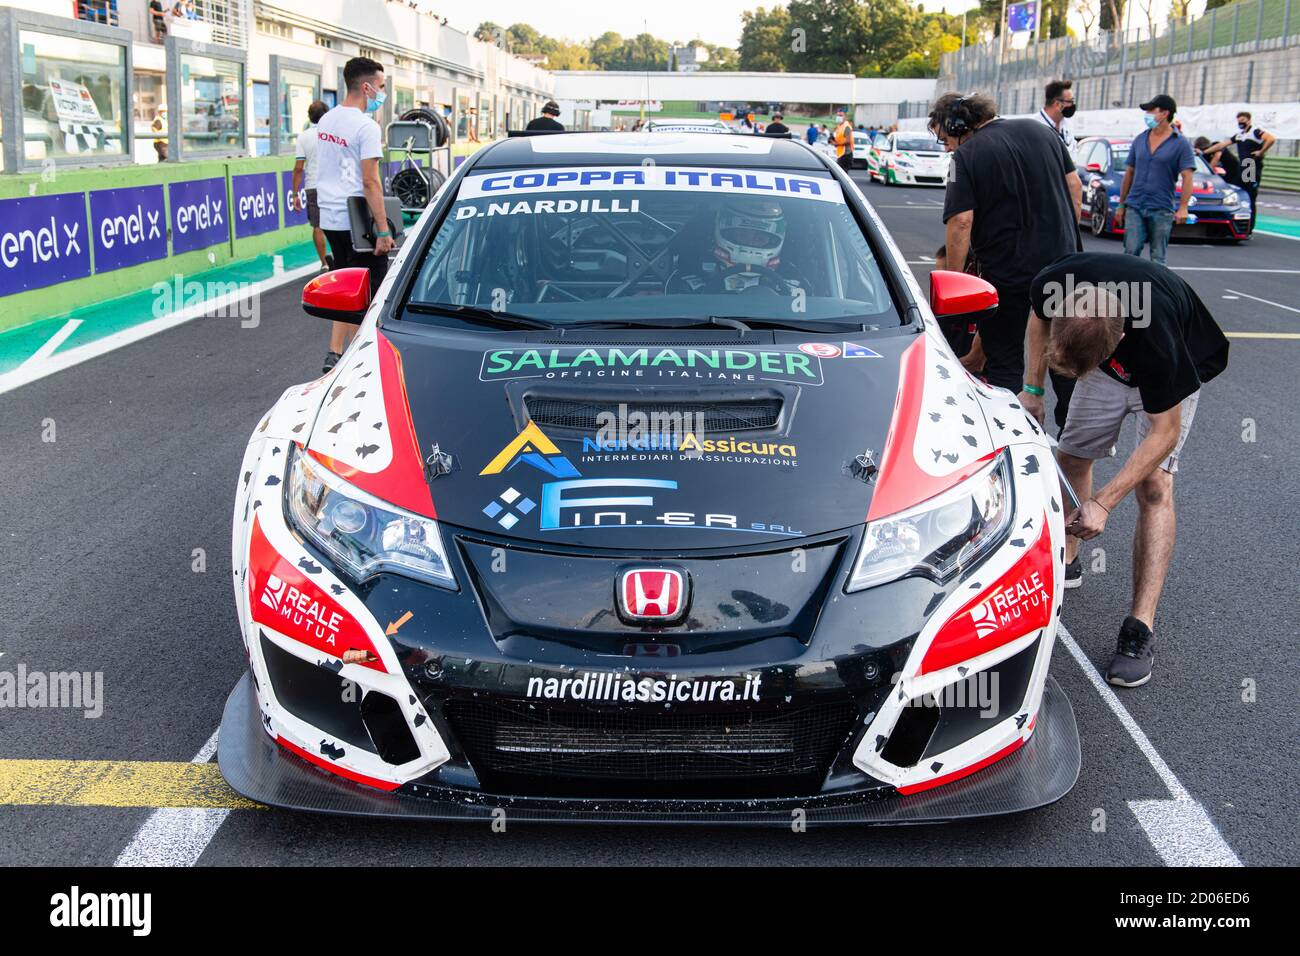 Vallelunga circuit, Rome, Italy, 12 september 2020. Touring cars championship, front view of Honda Civic on starting grid with mechanics Stock Photo